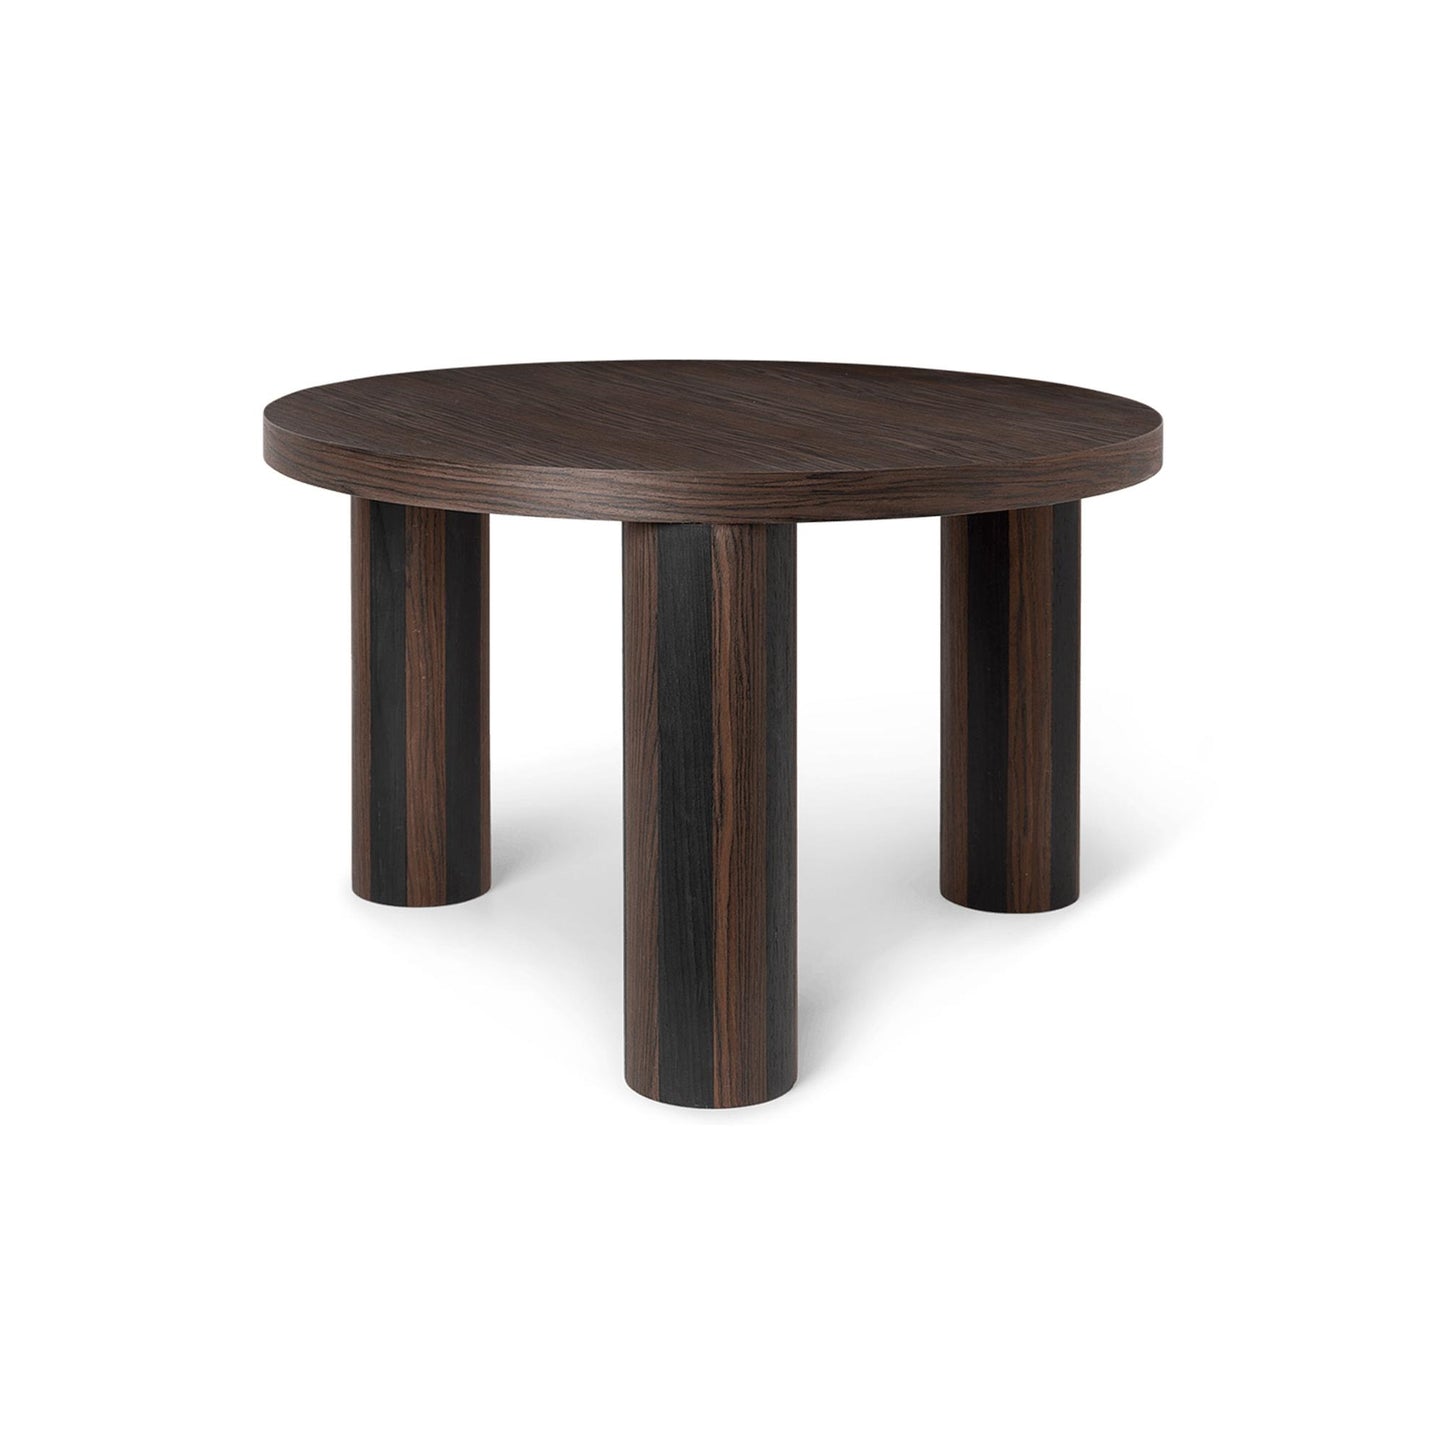 Post Lines Coffee Table Small Smoked Oak by Ferm Living #Smoked Oak